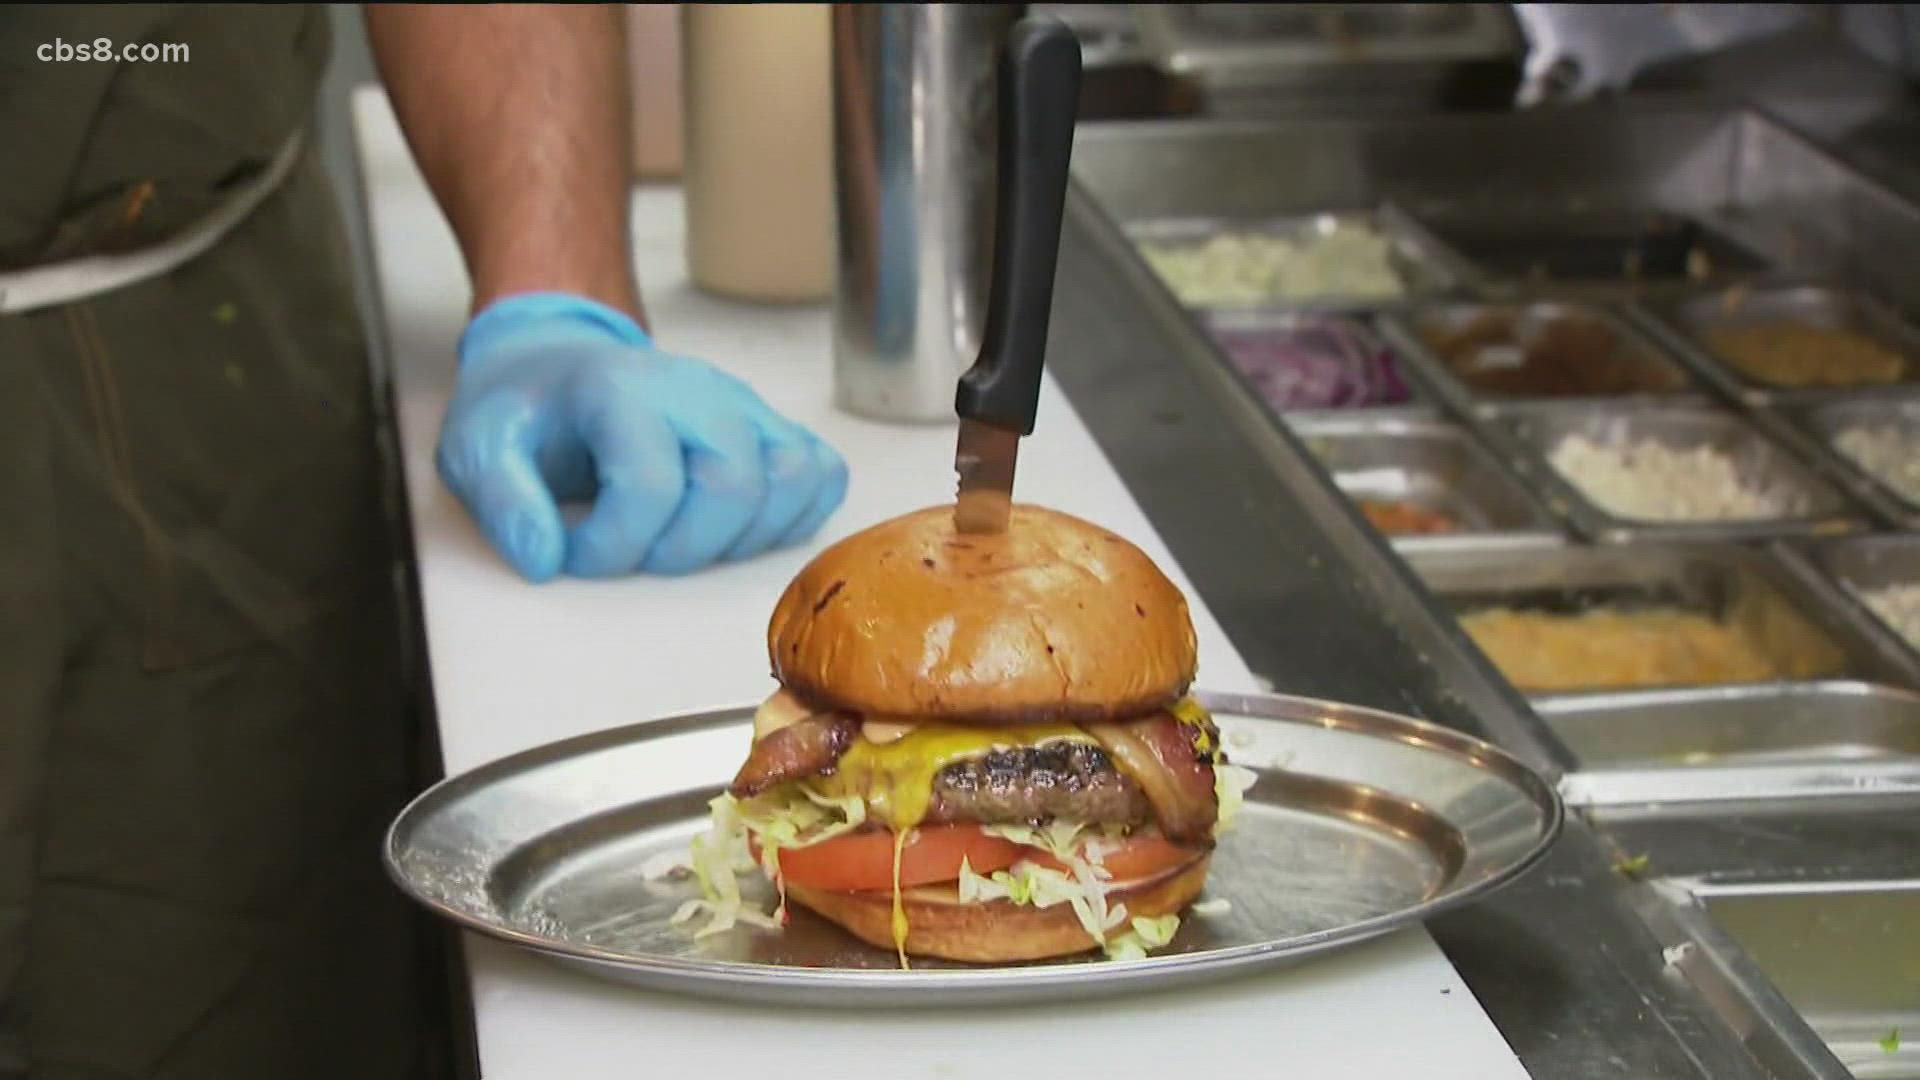 Jenny went to Carlsbad to check out Notorious Burger and even tried her hand at making a burger herself.